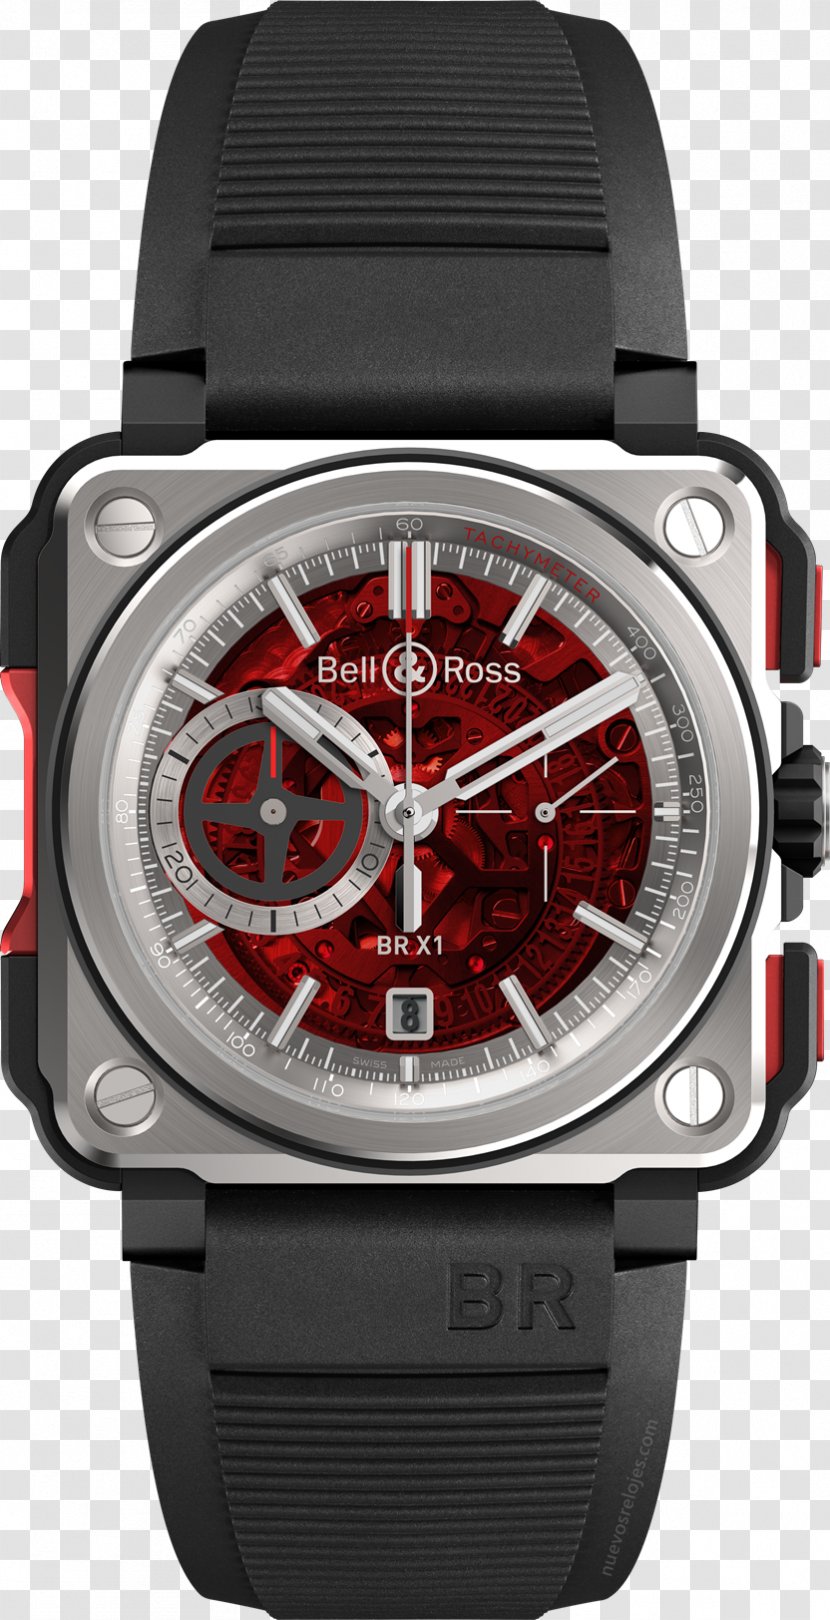 Chronograph Automatic Watch Bell & Ross, Inc. - Strap Transparent PNG